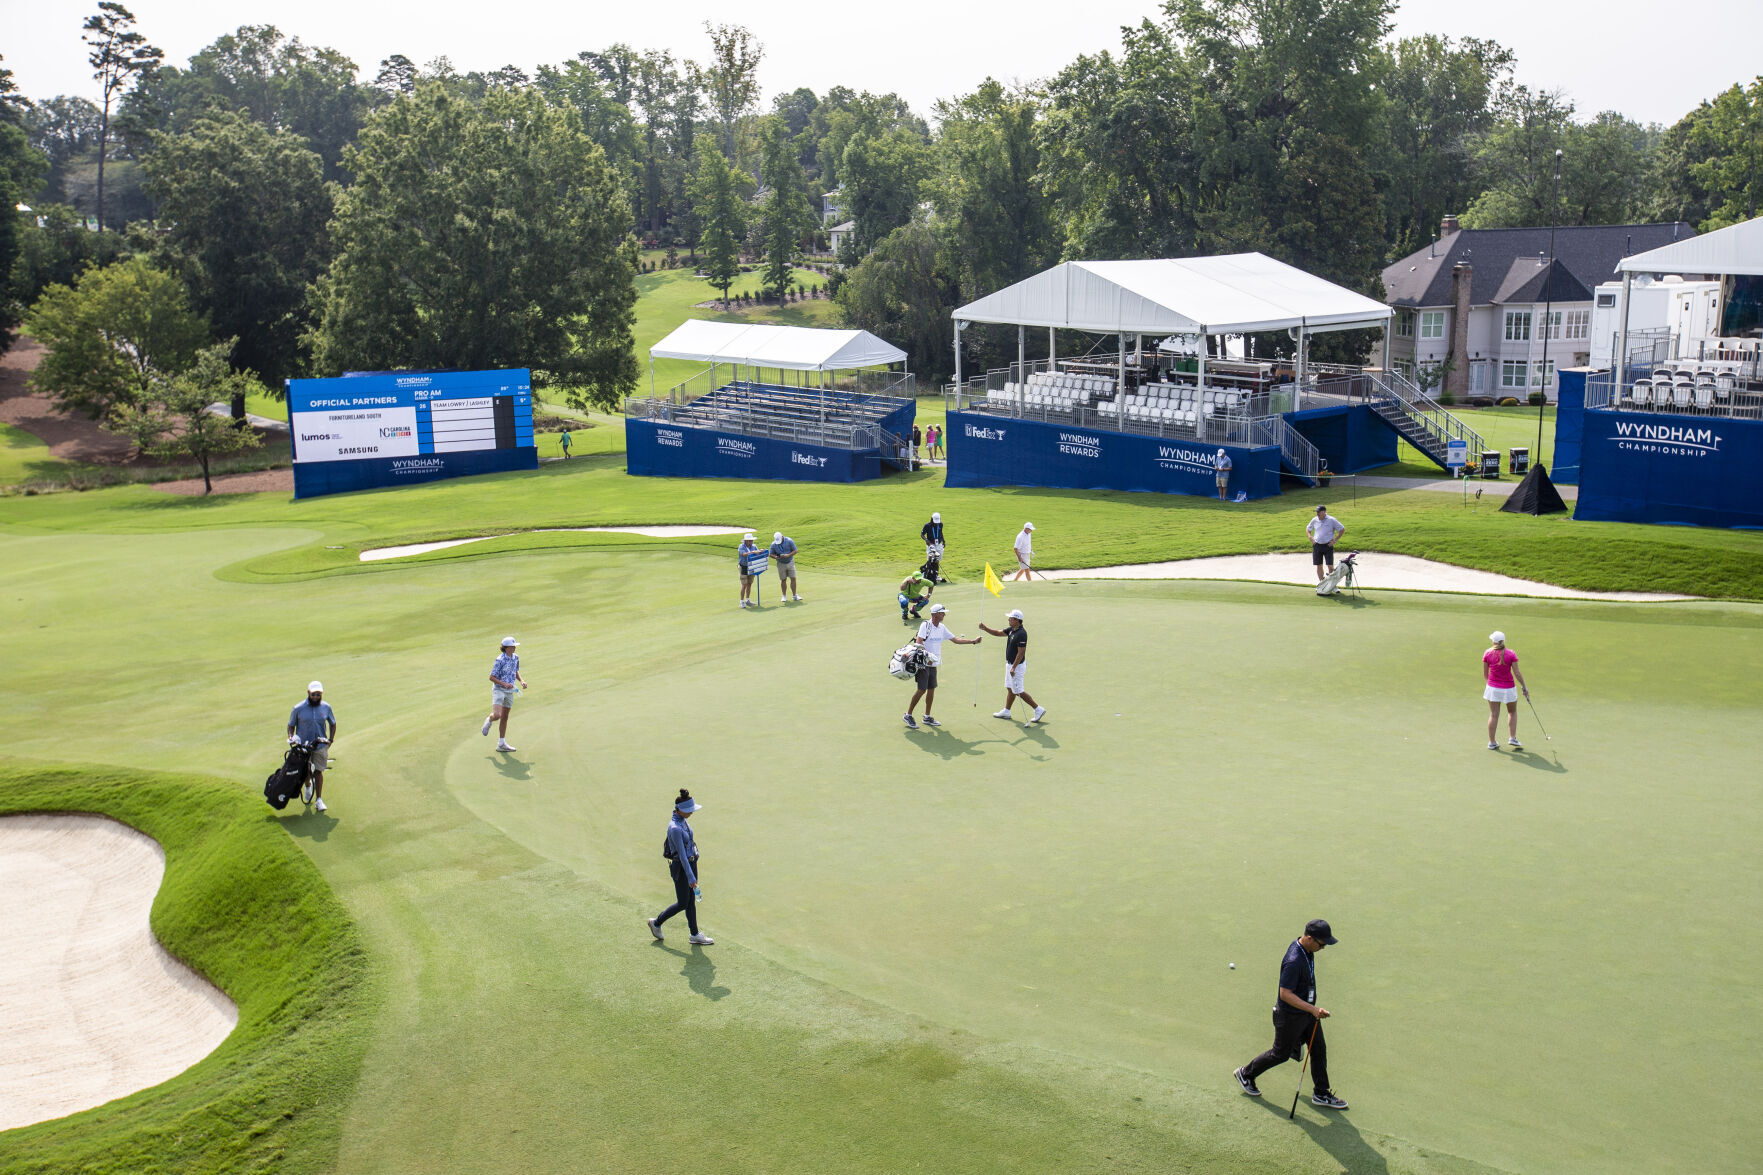 Five golfers to watch at the Wyndham Championship this week at Sedgefield Country Club